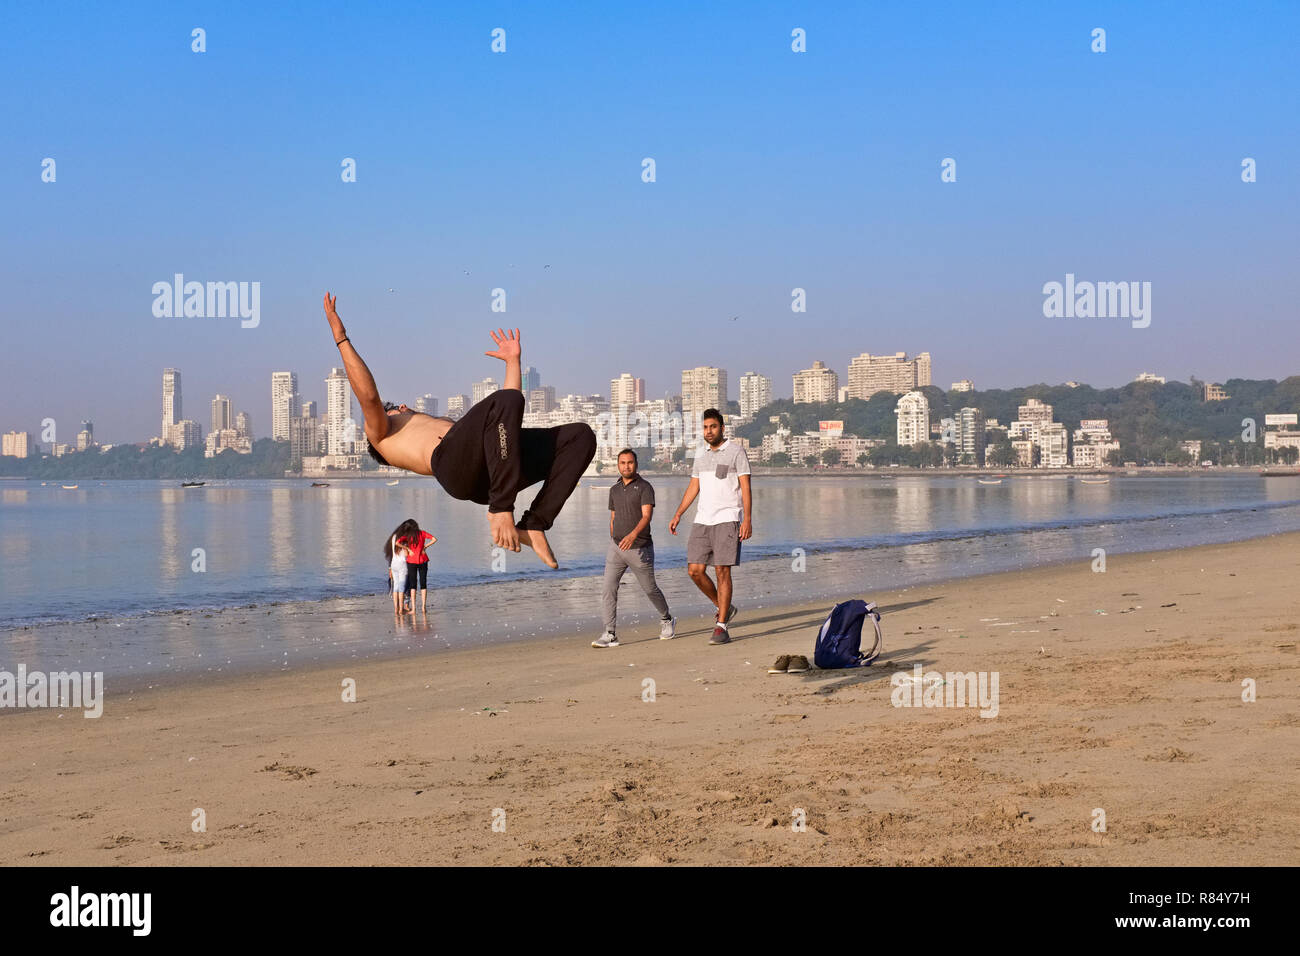 A young man on the beach by the Arabian Sea off Marine Drive, Mumbai, India, practicing somersaults as part of a dance routine Stock Photo